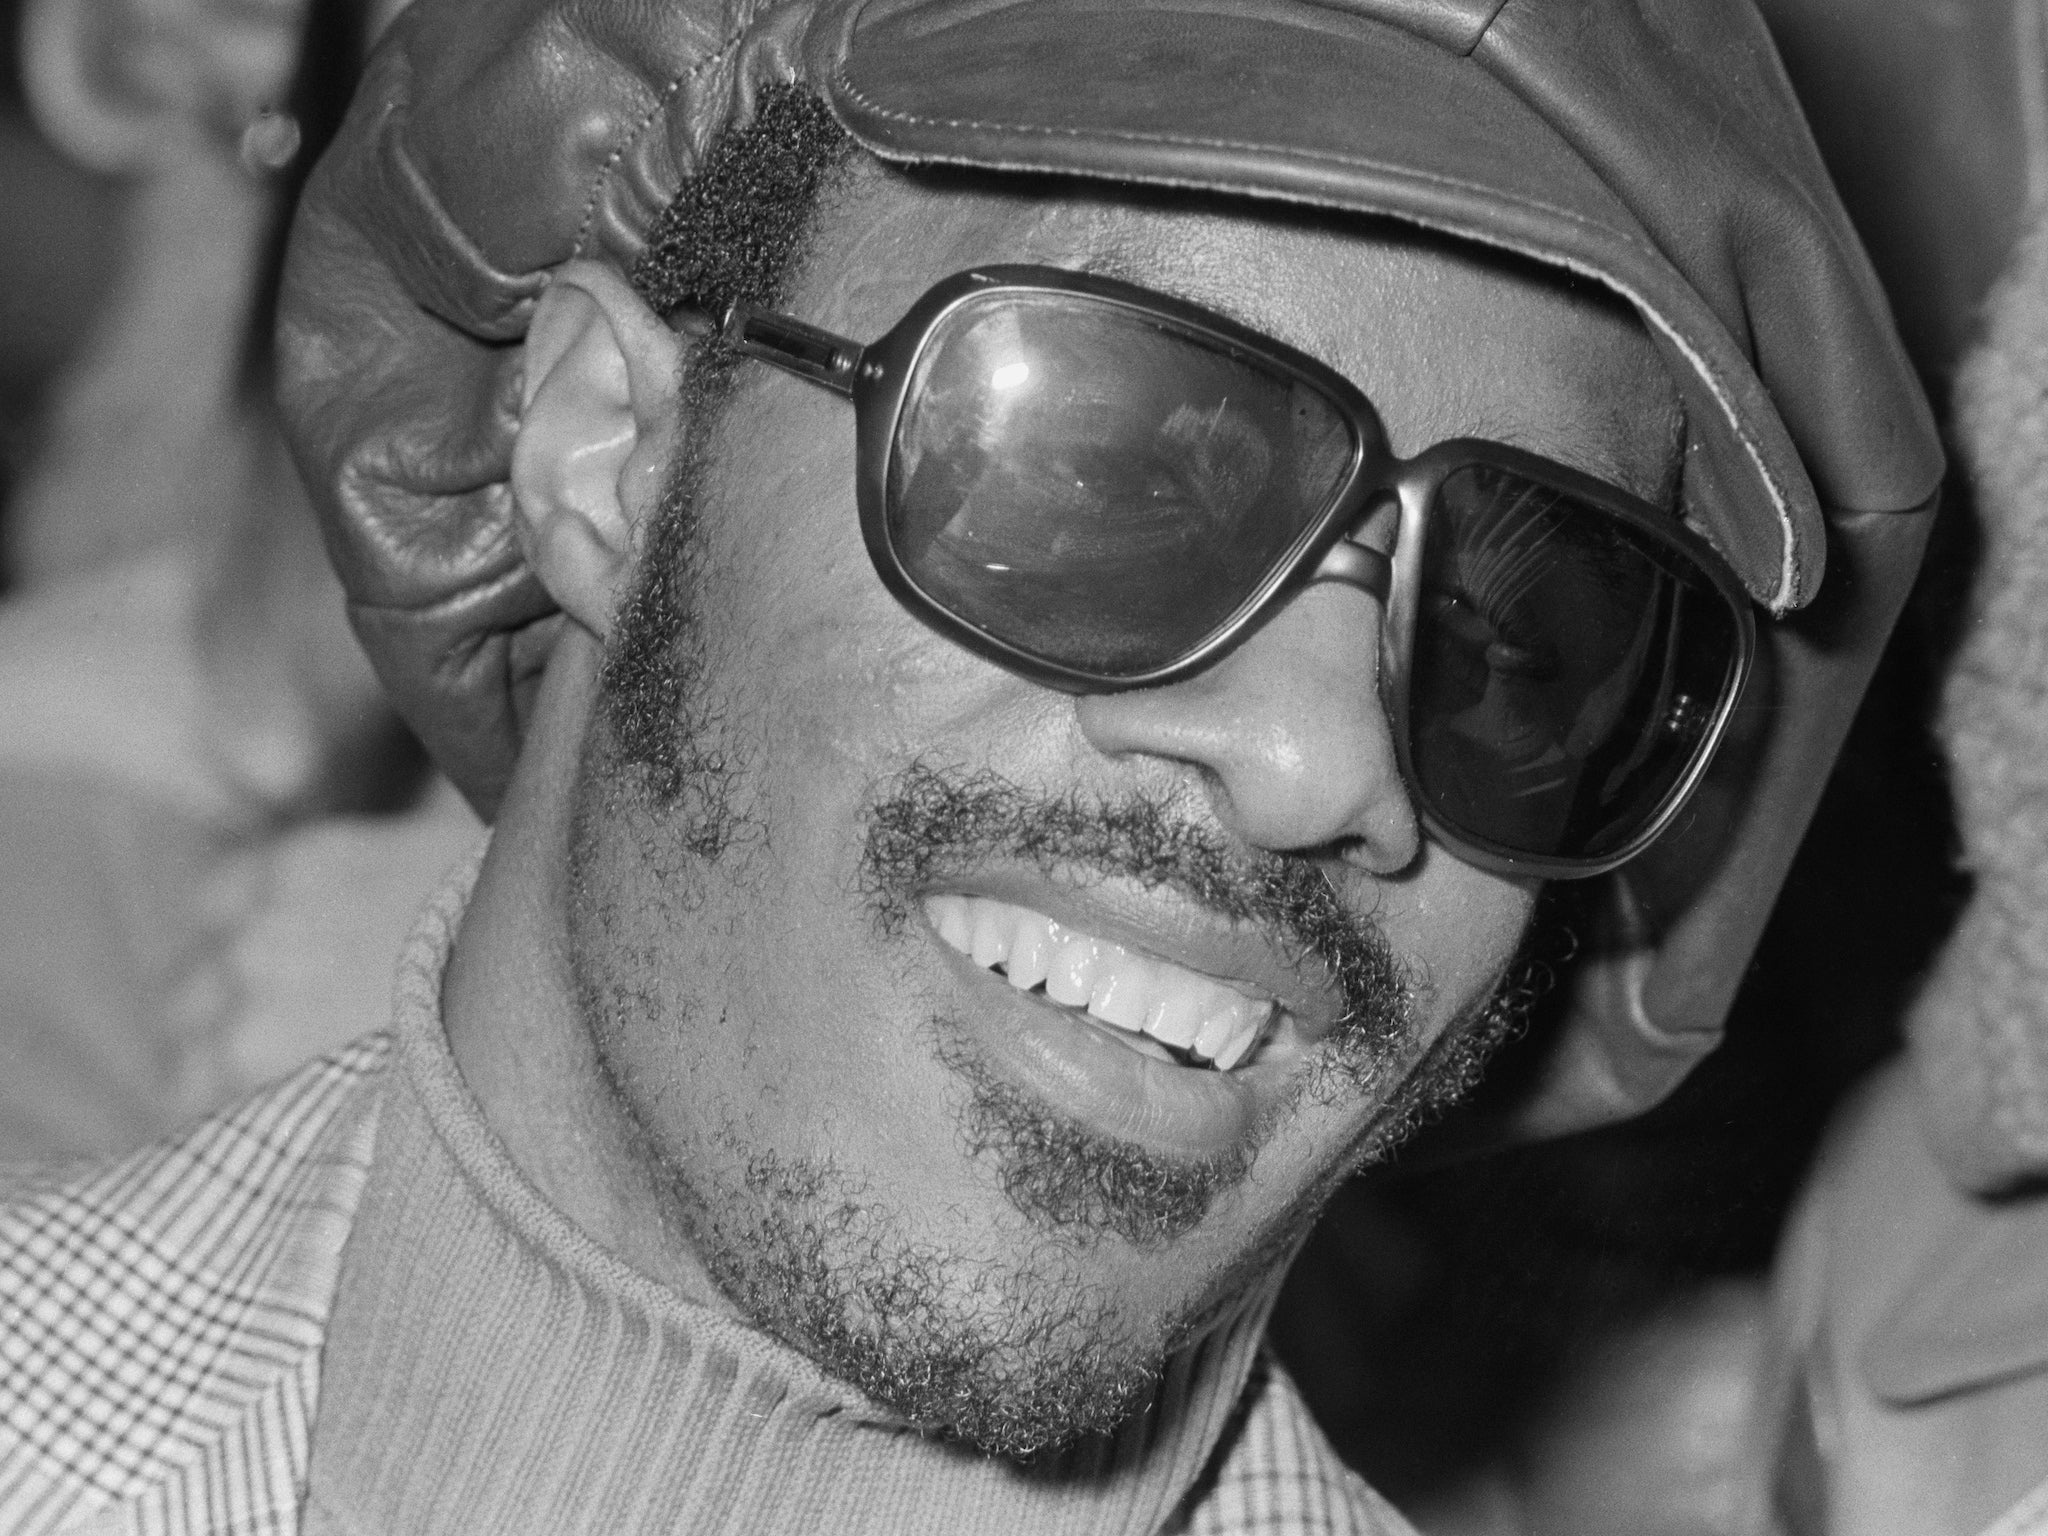 Stevie Wonder photographed in the UK on 25 January 1974, a year after his near-fatal crash